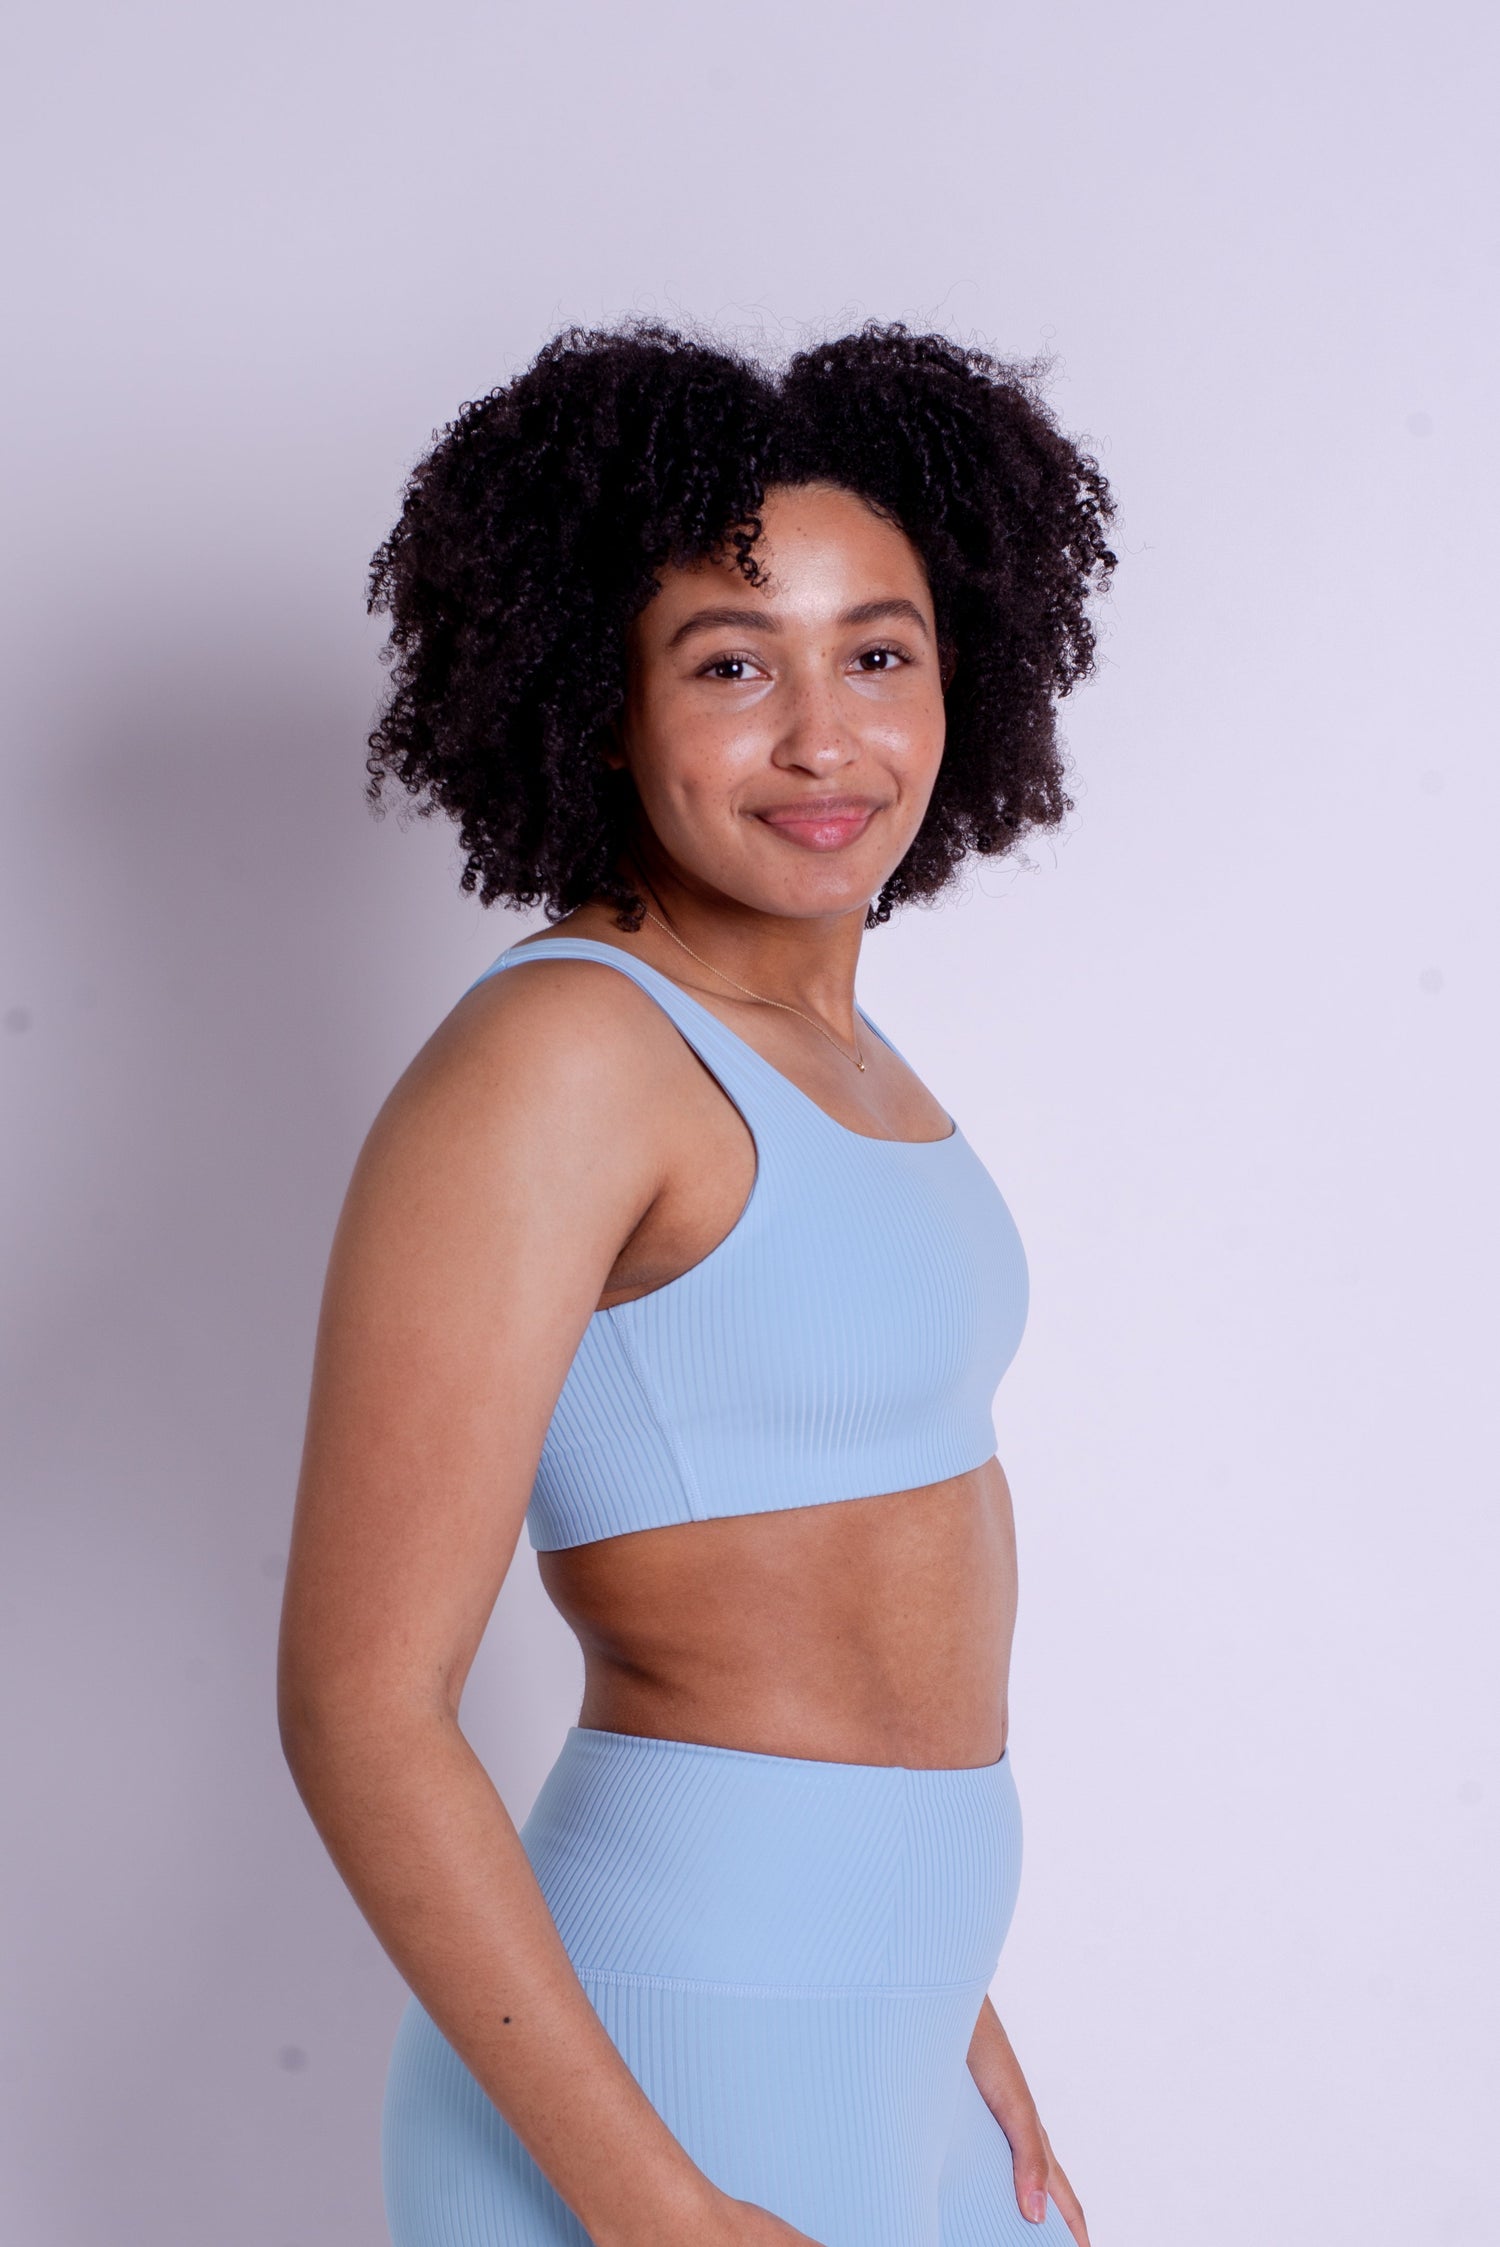 Girlfriend Collective RIB Tommy Bra - Made from Recycled Plastic Bottles Bluebell 3XL Underwear